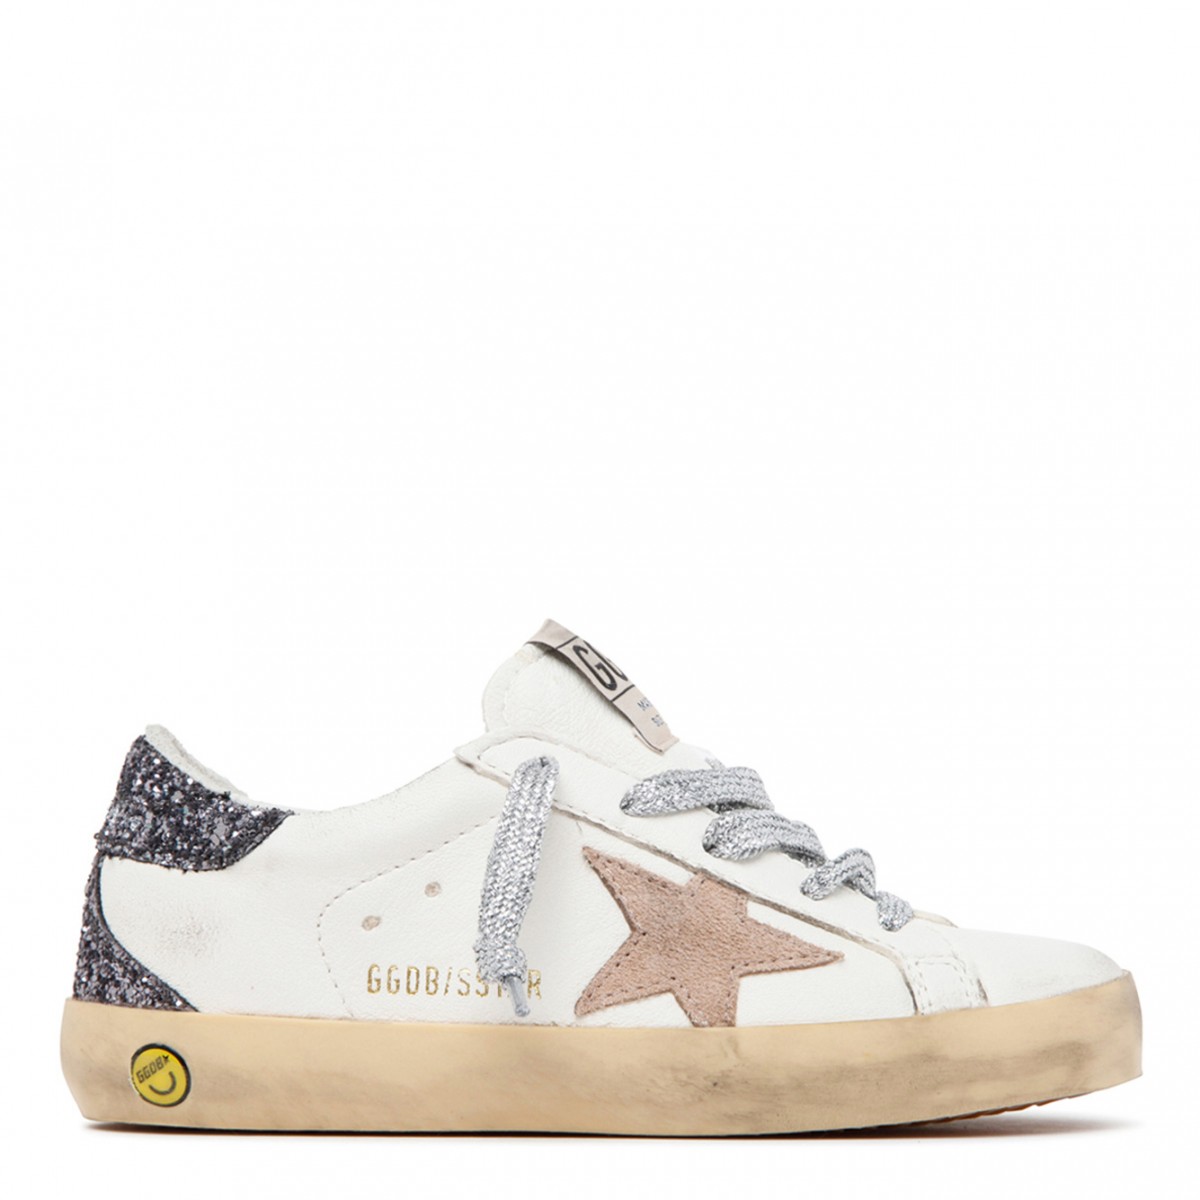 Golden Goose Kids Super Star Cream White and Beige Calf Leather Low Top Sneakers.